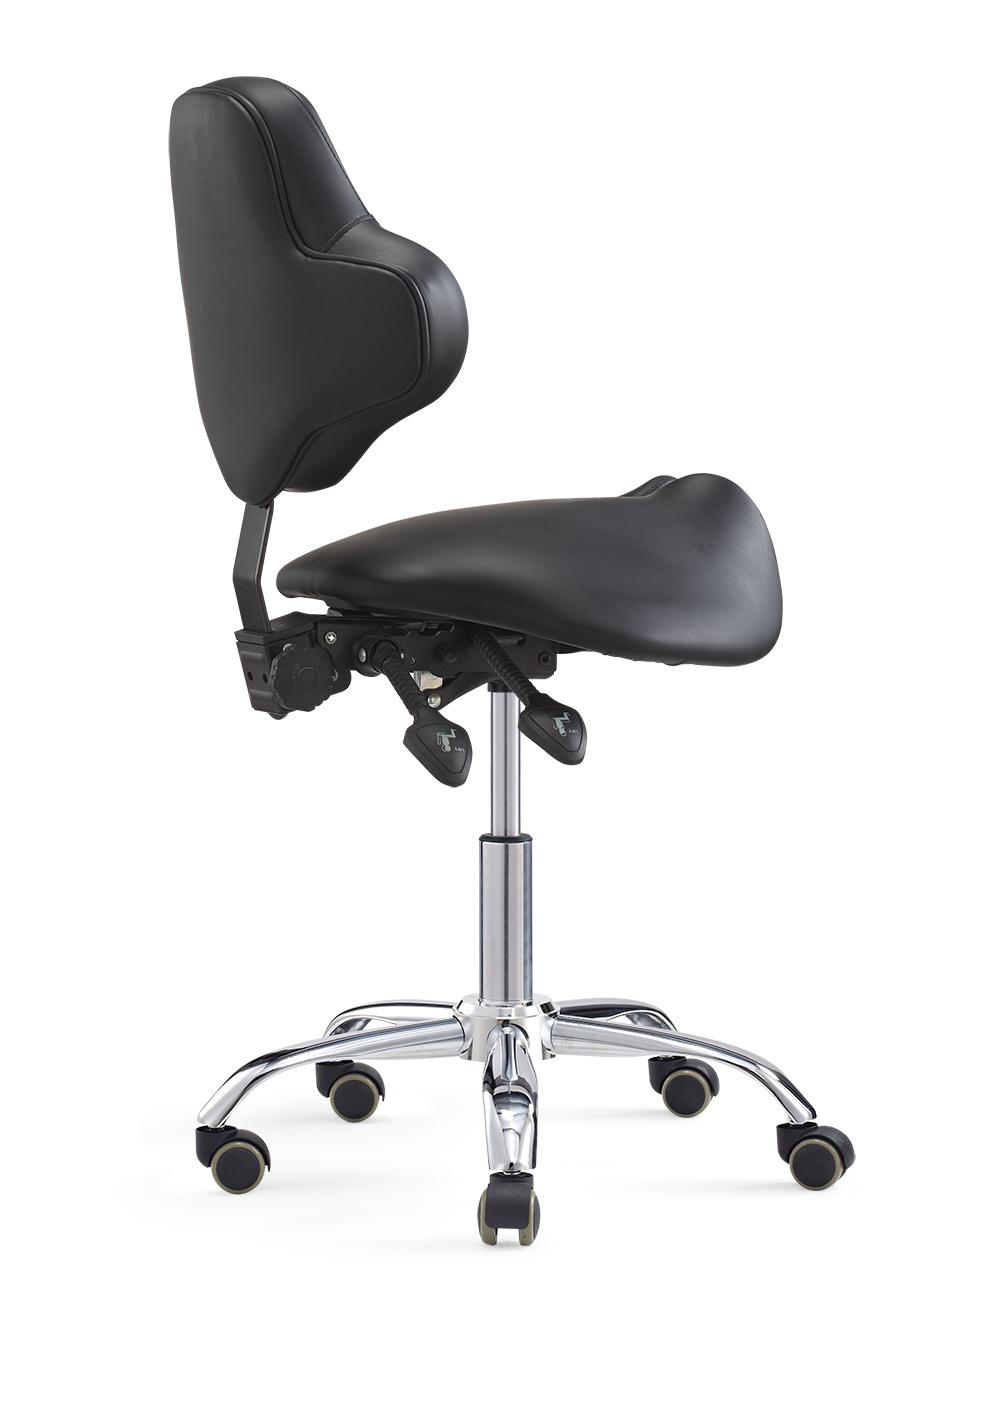 Massage Tools Rolling Saddle Stool with Back Support